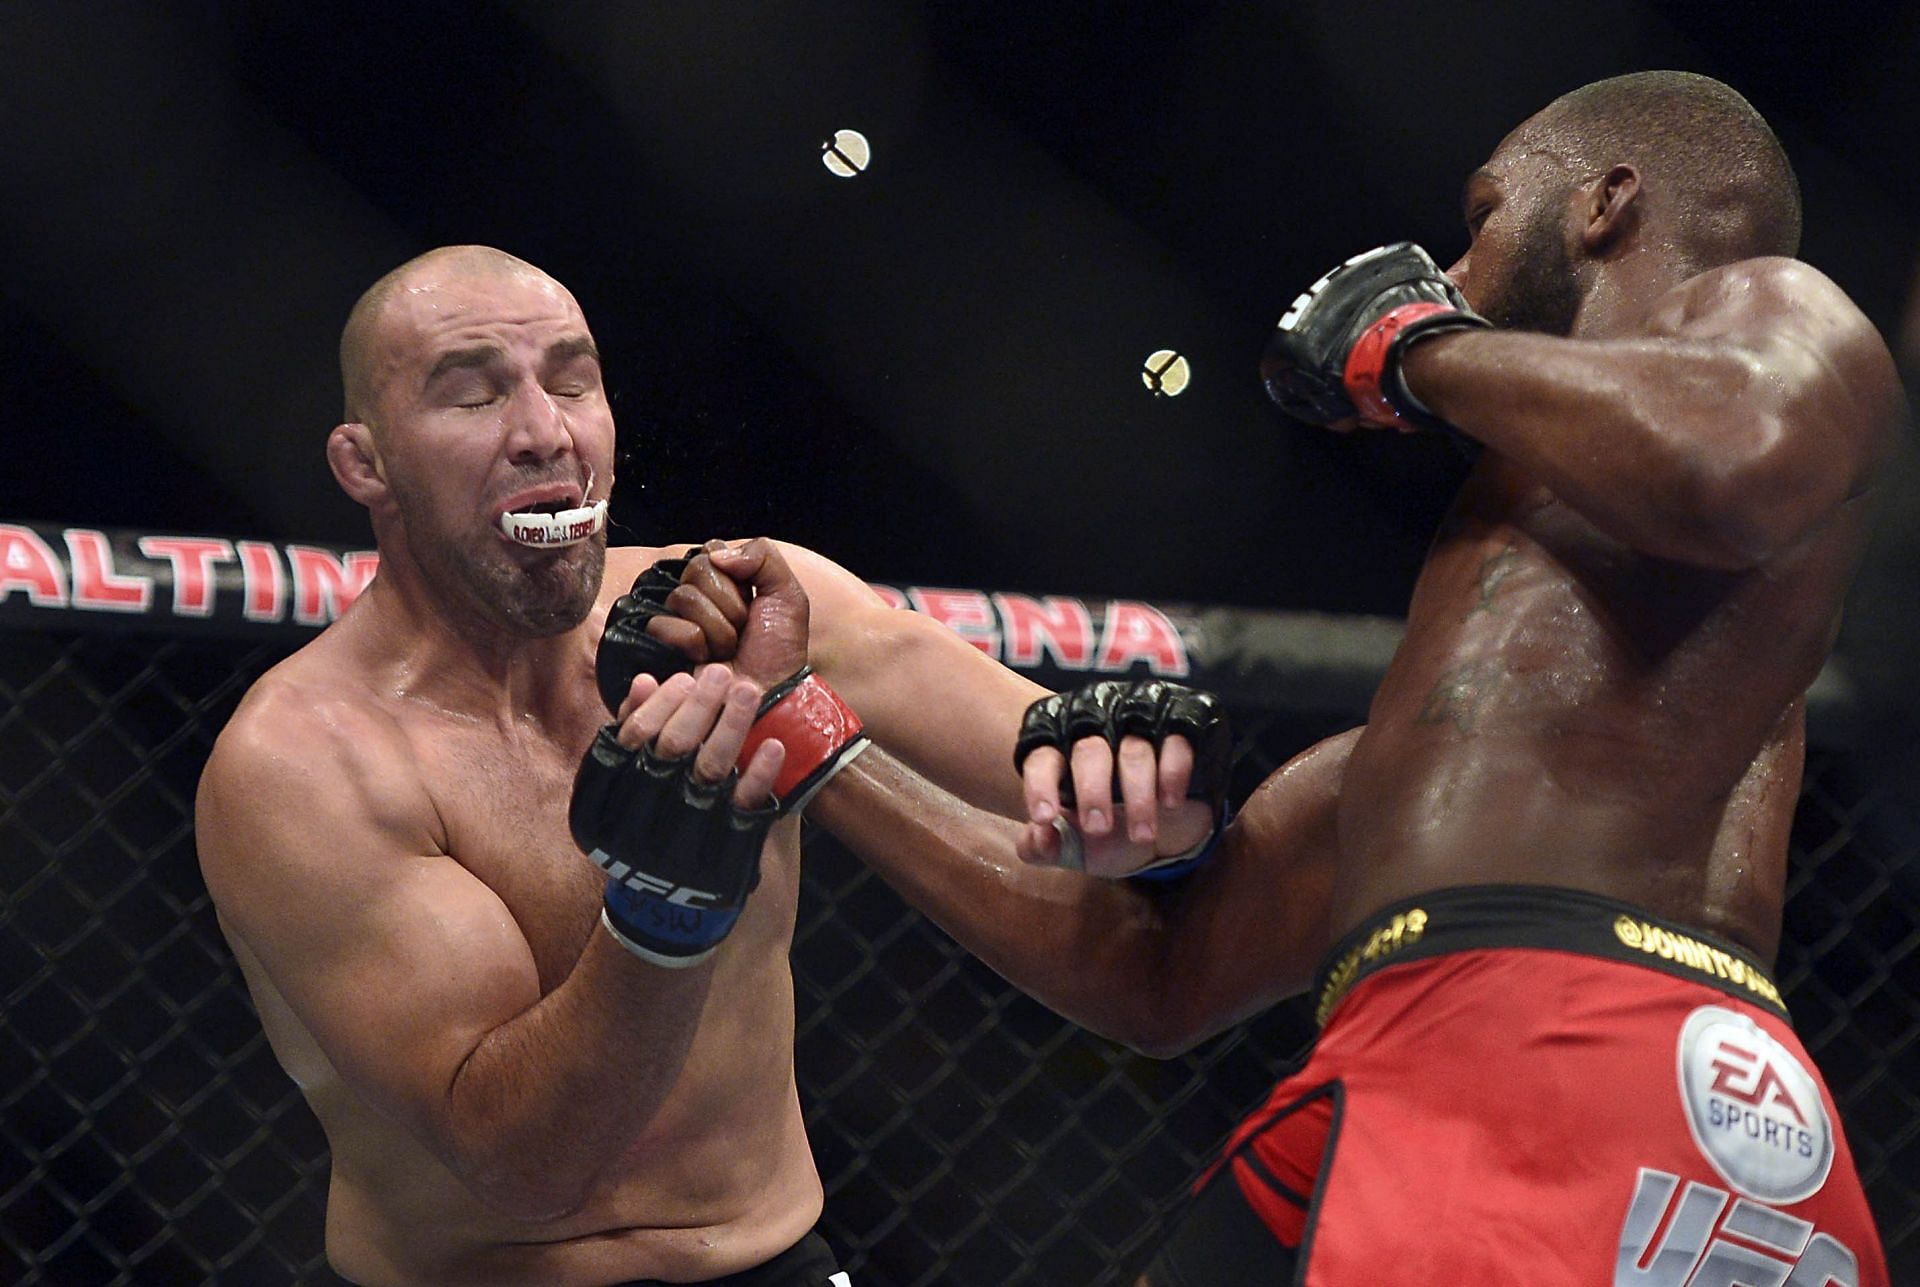 Glover Teixeira came up short in his first title fight against champion Jon Jones.